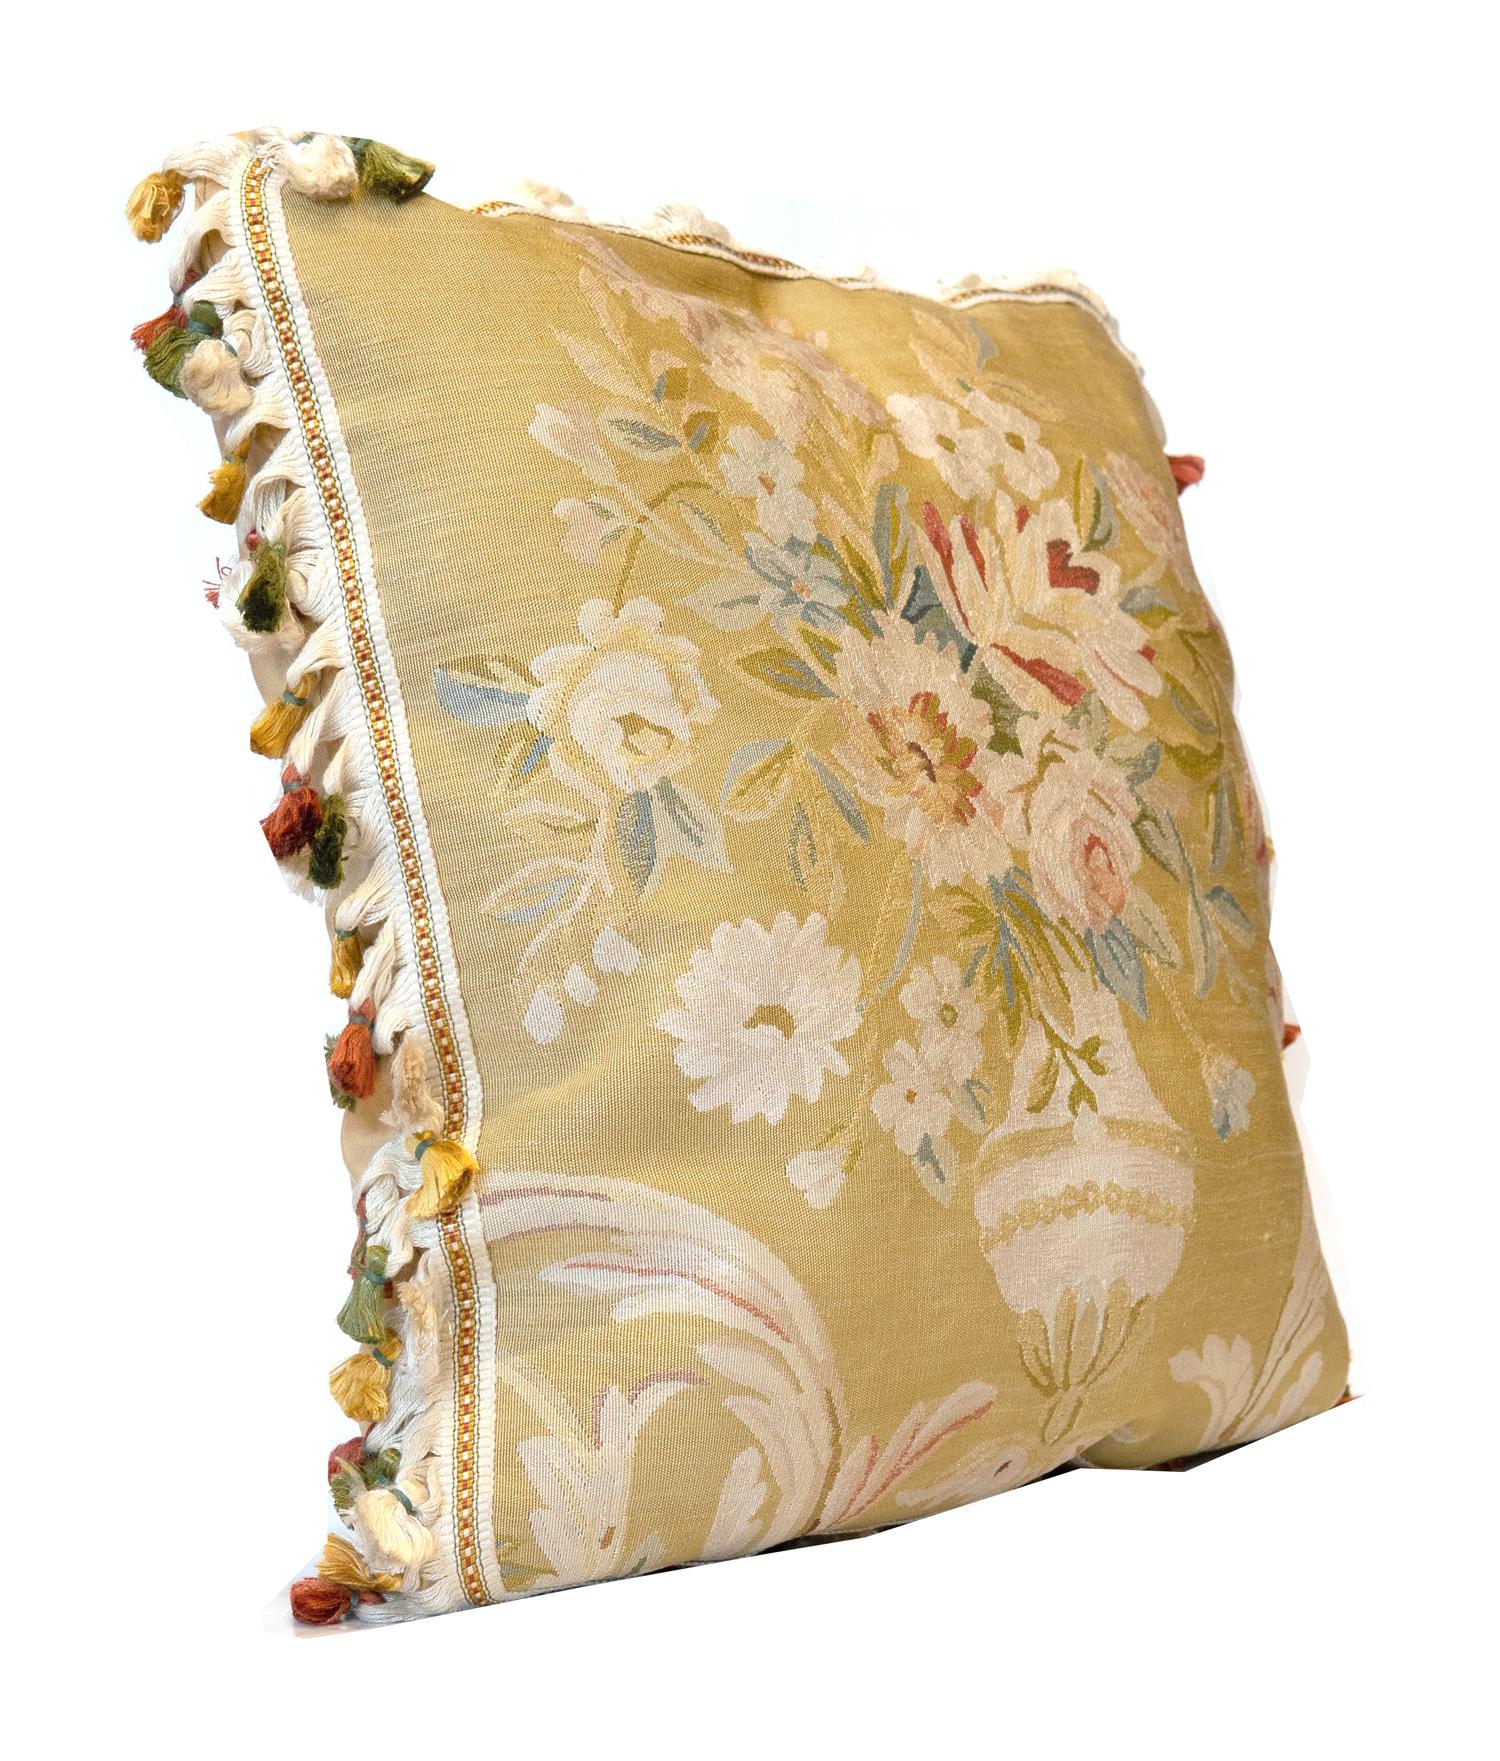 Antique rug vintage pillowcase zipper cushion handmade Aubusson pillow cover, view one of the most comprehensive collections of the decorative pillow, handmade throw pillow cover of traditional French Aubusson rugs, pure silk cushions cover with